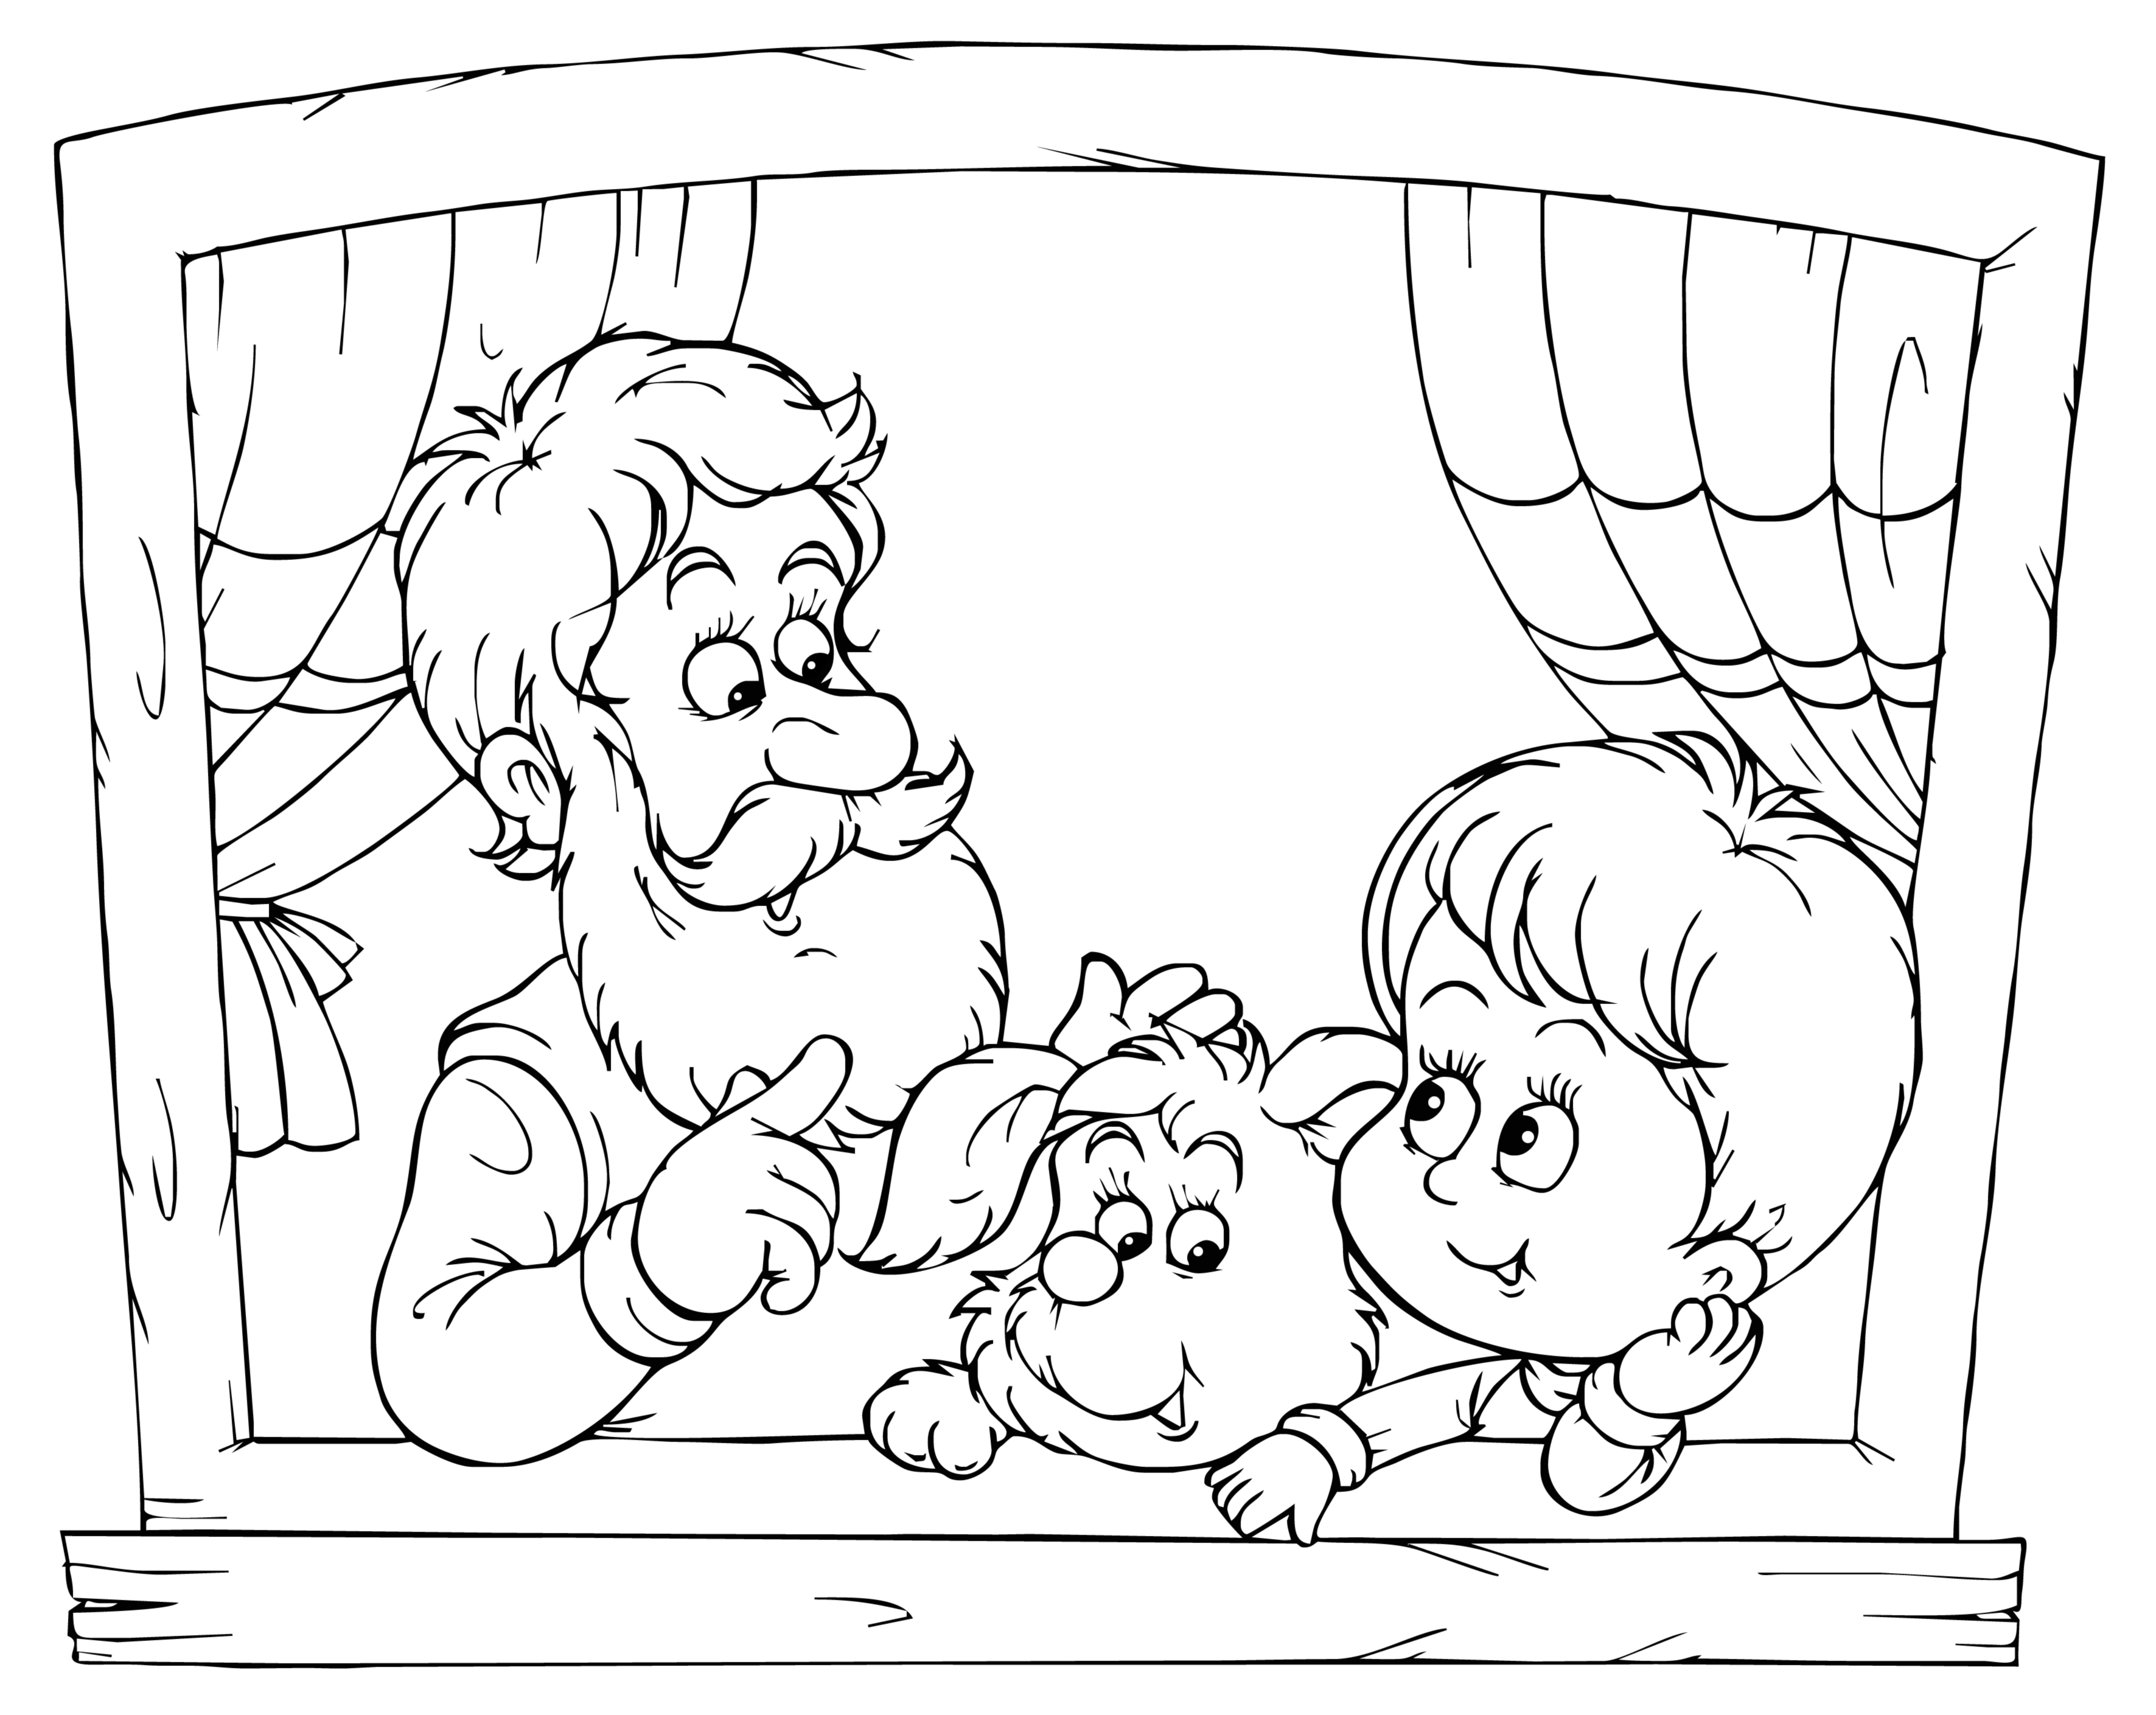 Download Grandma coloring pages download and print for free